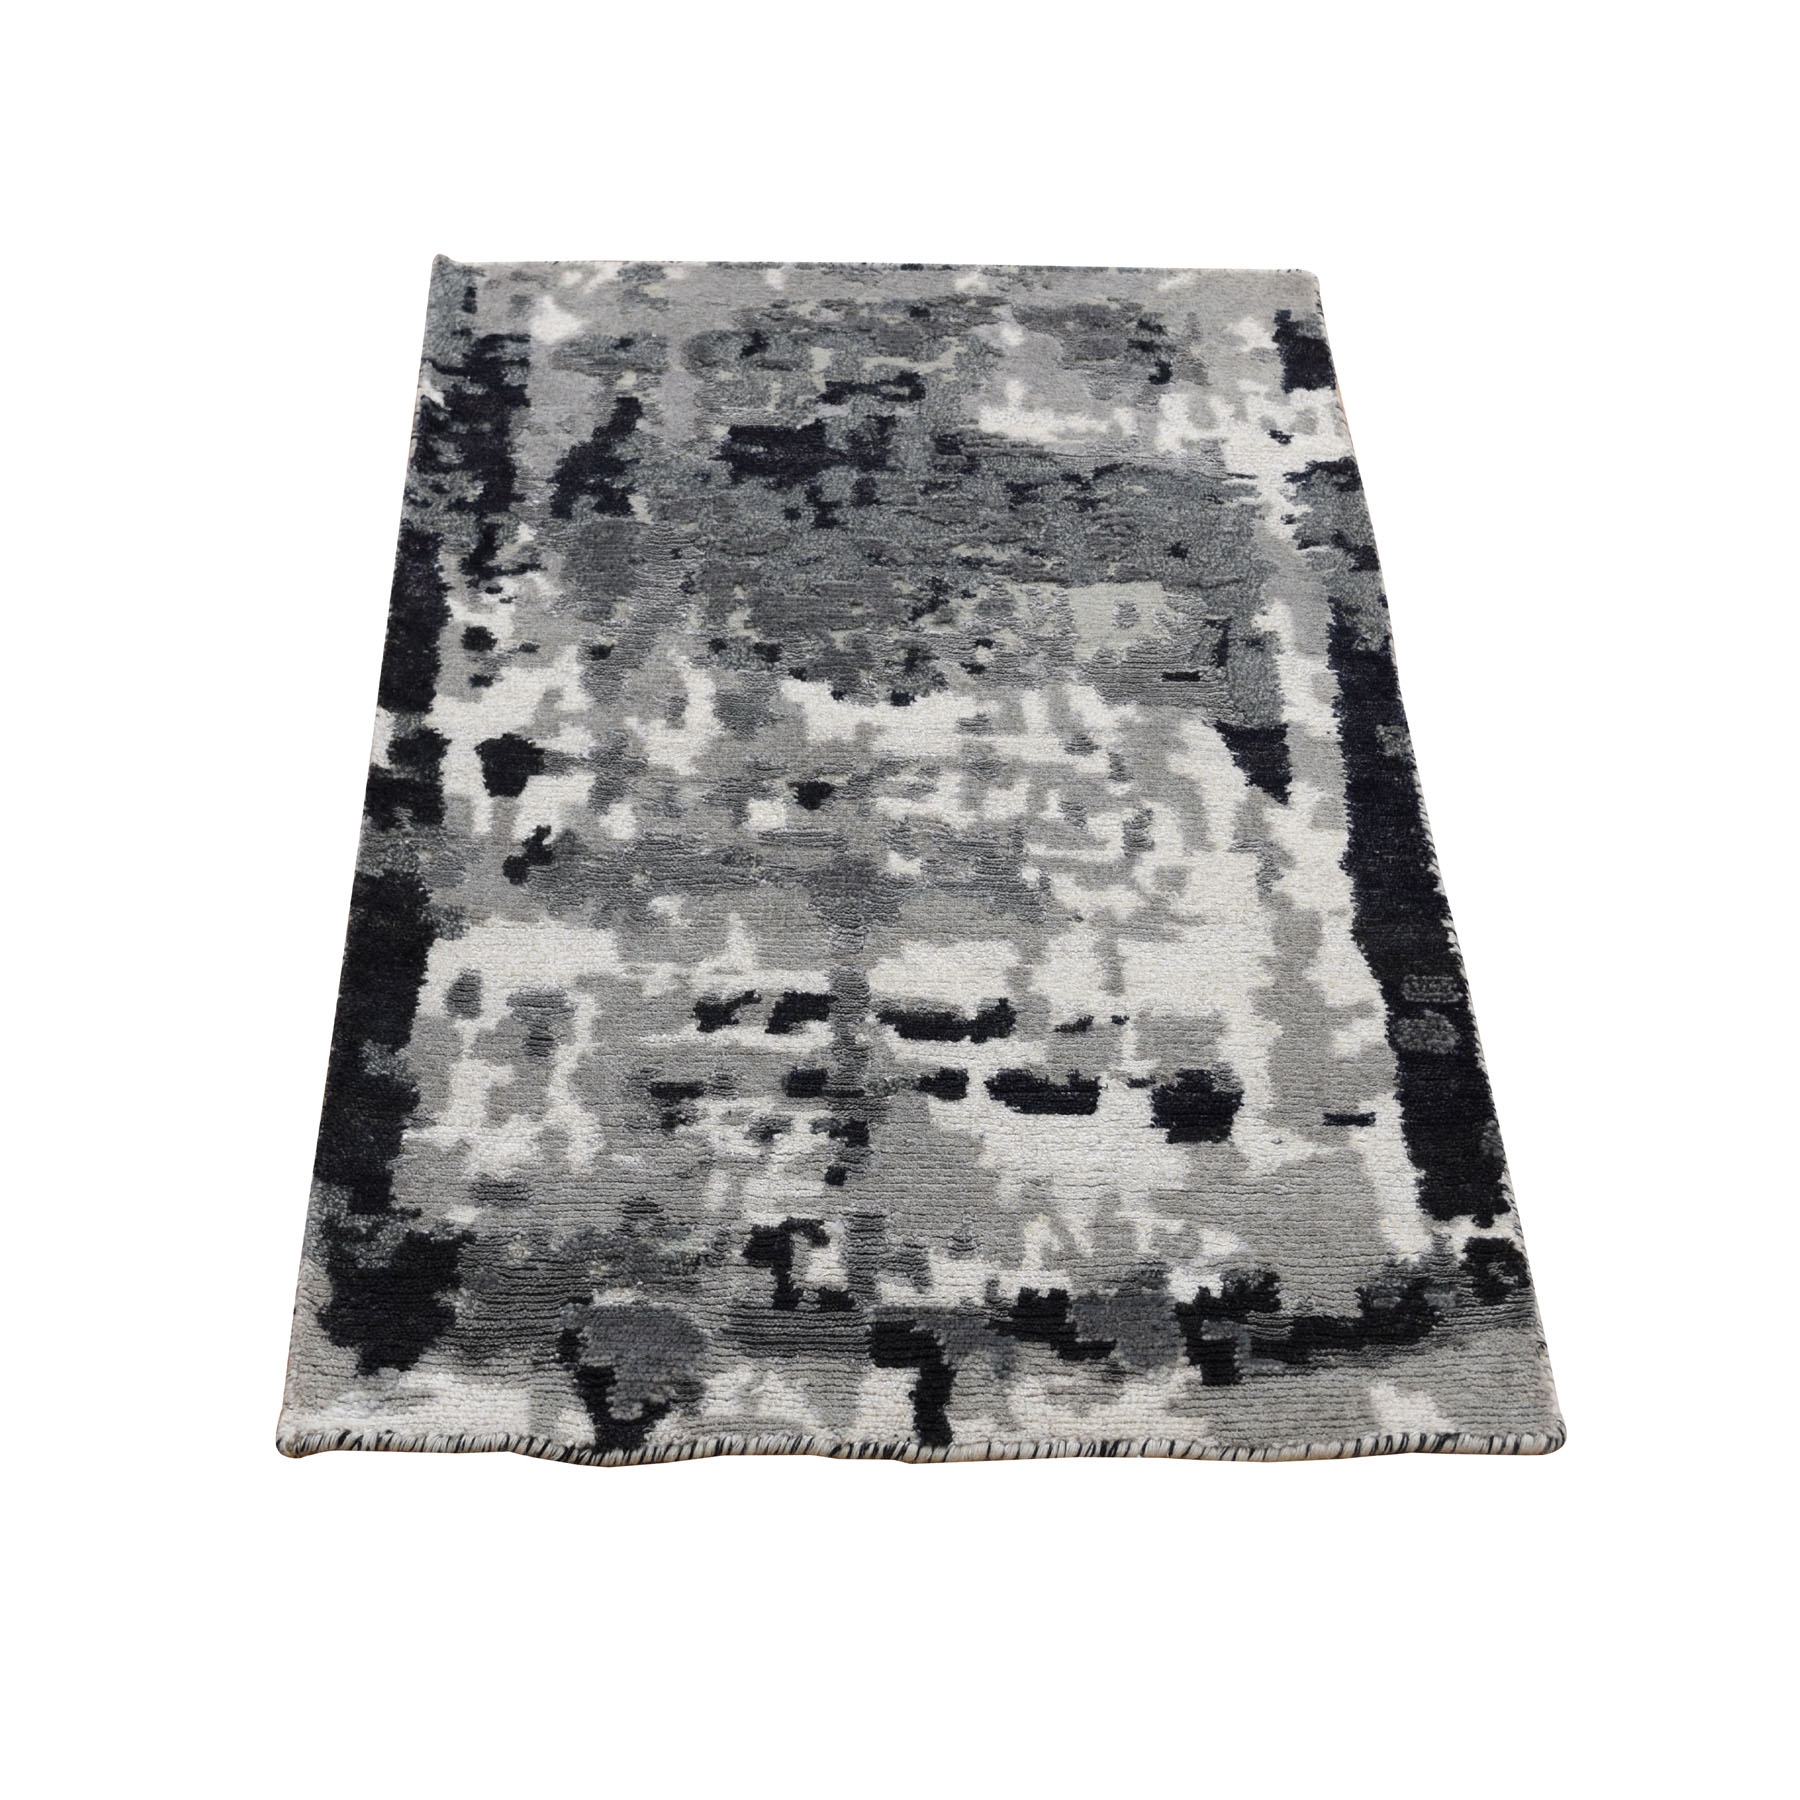 2'X3' Black Abstract Design Hi-Lo Pile Wool And Silk Hand Knotted Oriental Rug moad8aac